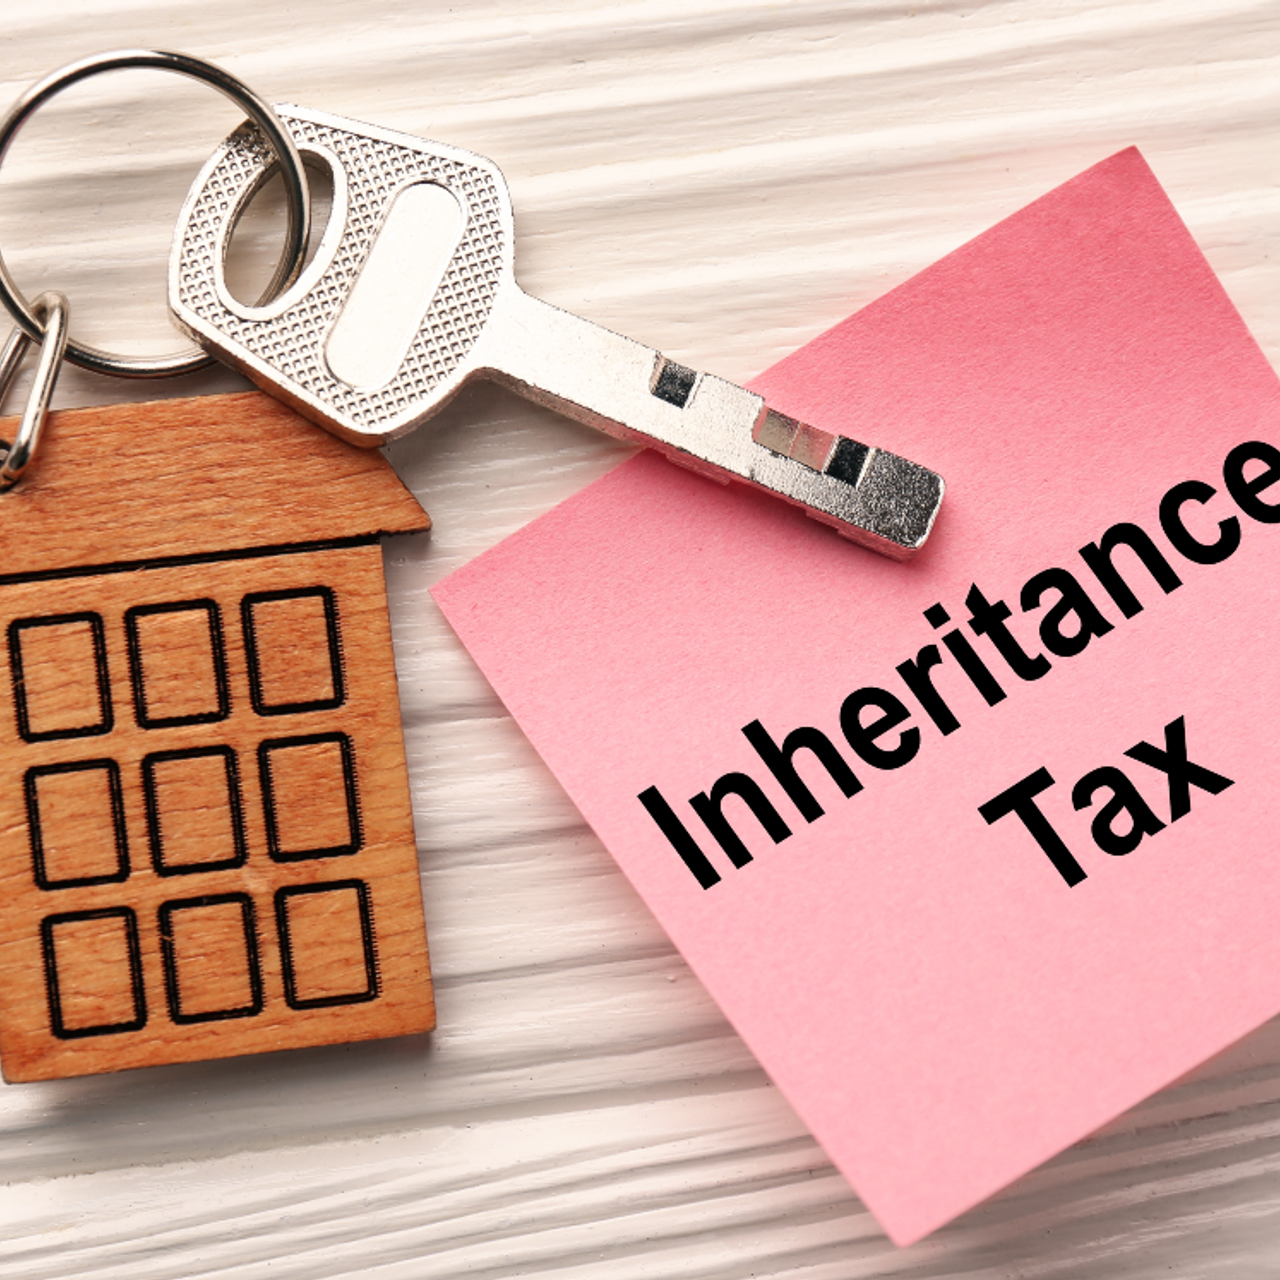 Inheritance Tax in India: Promoting wealth redistribution and ensuring a level playing field amid rising inequality